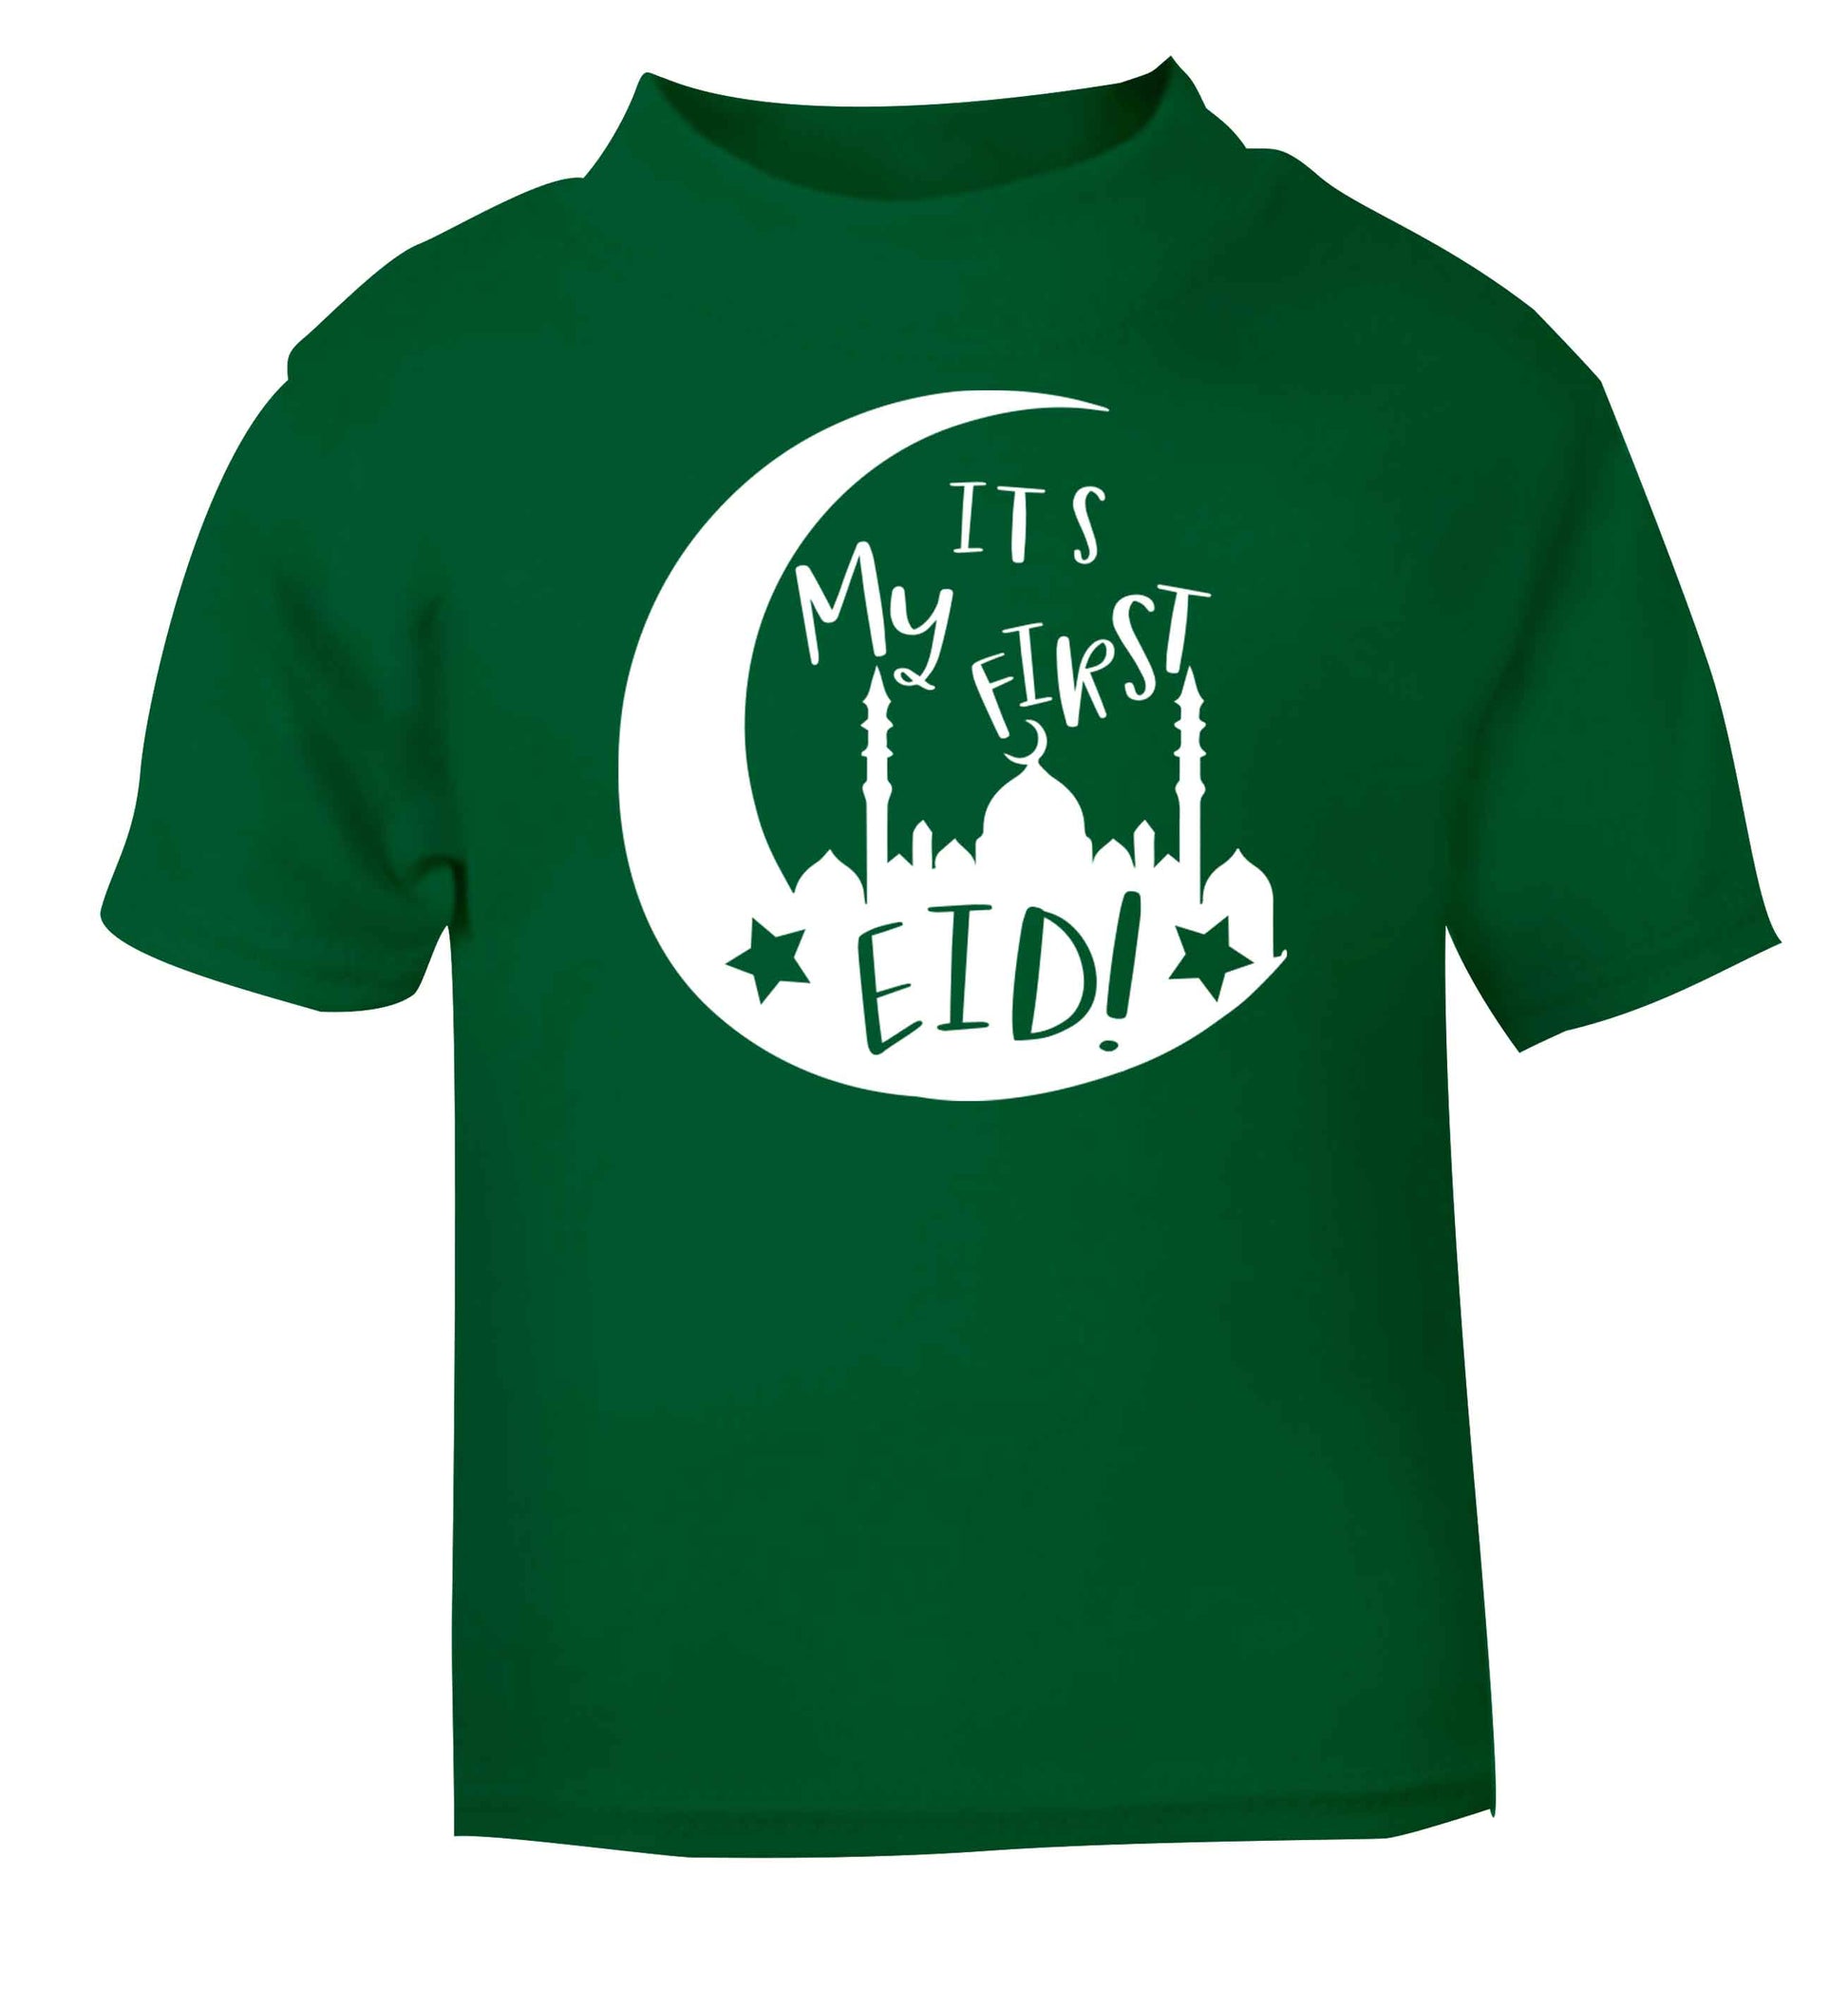 It's my first Eid moon green baby toddler Tshirt 2 Years